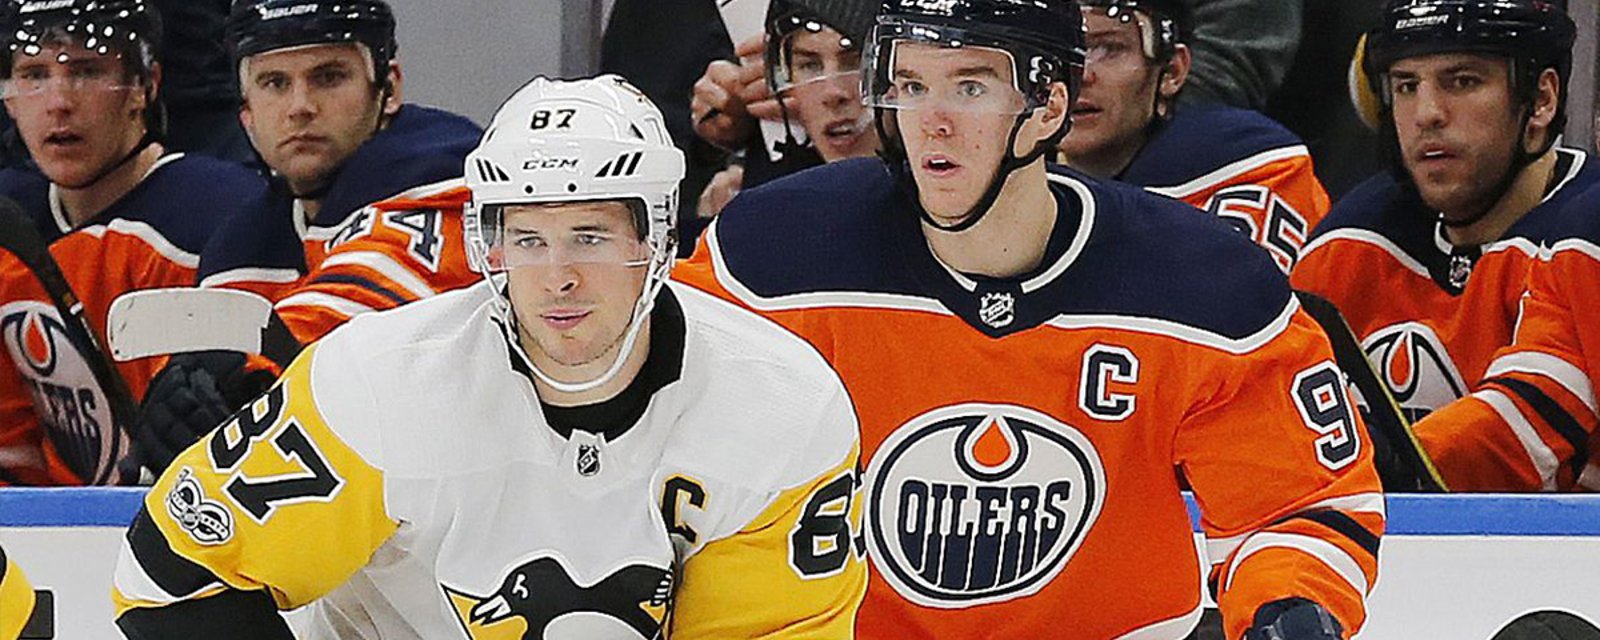 Breaking: Oilers make big lineup changes for tonight’s game against Penguins